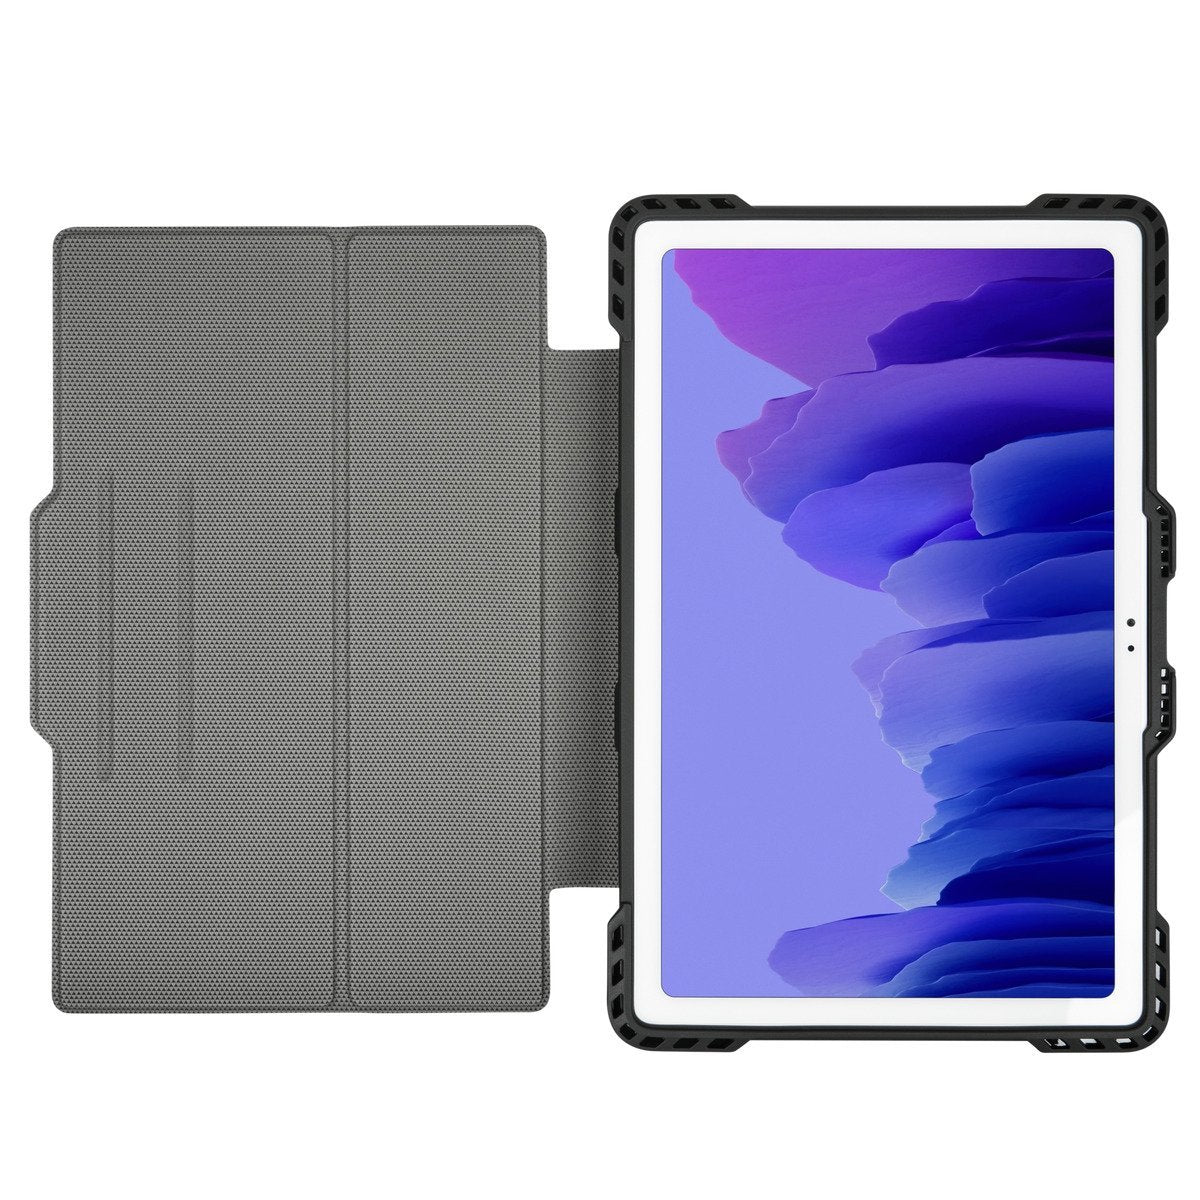 Tablette Android SAMSUNG Samsung Galaxy Tab A7 Reconditionné